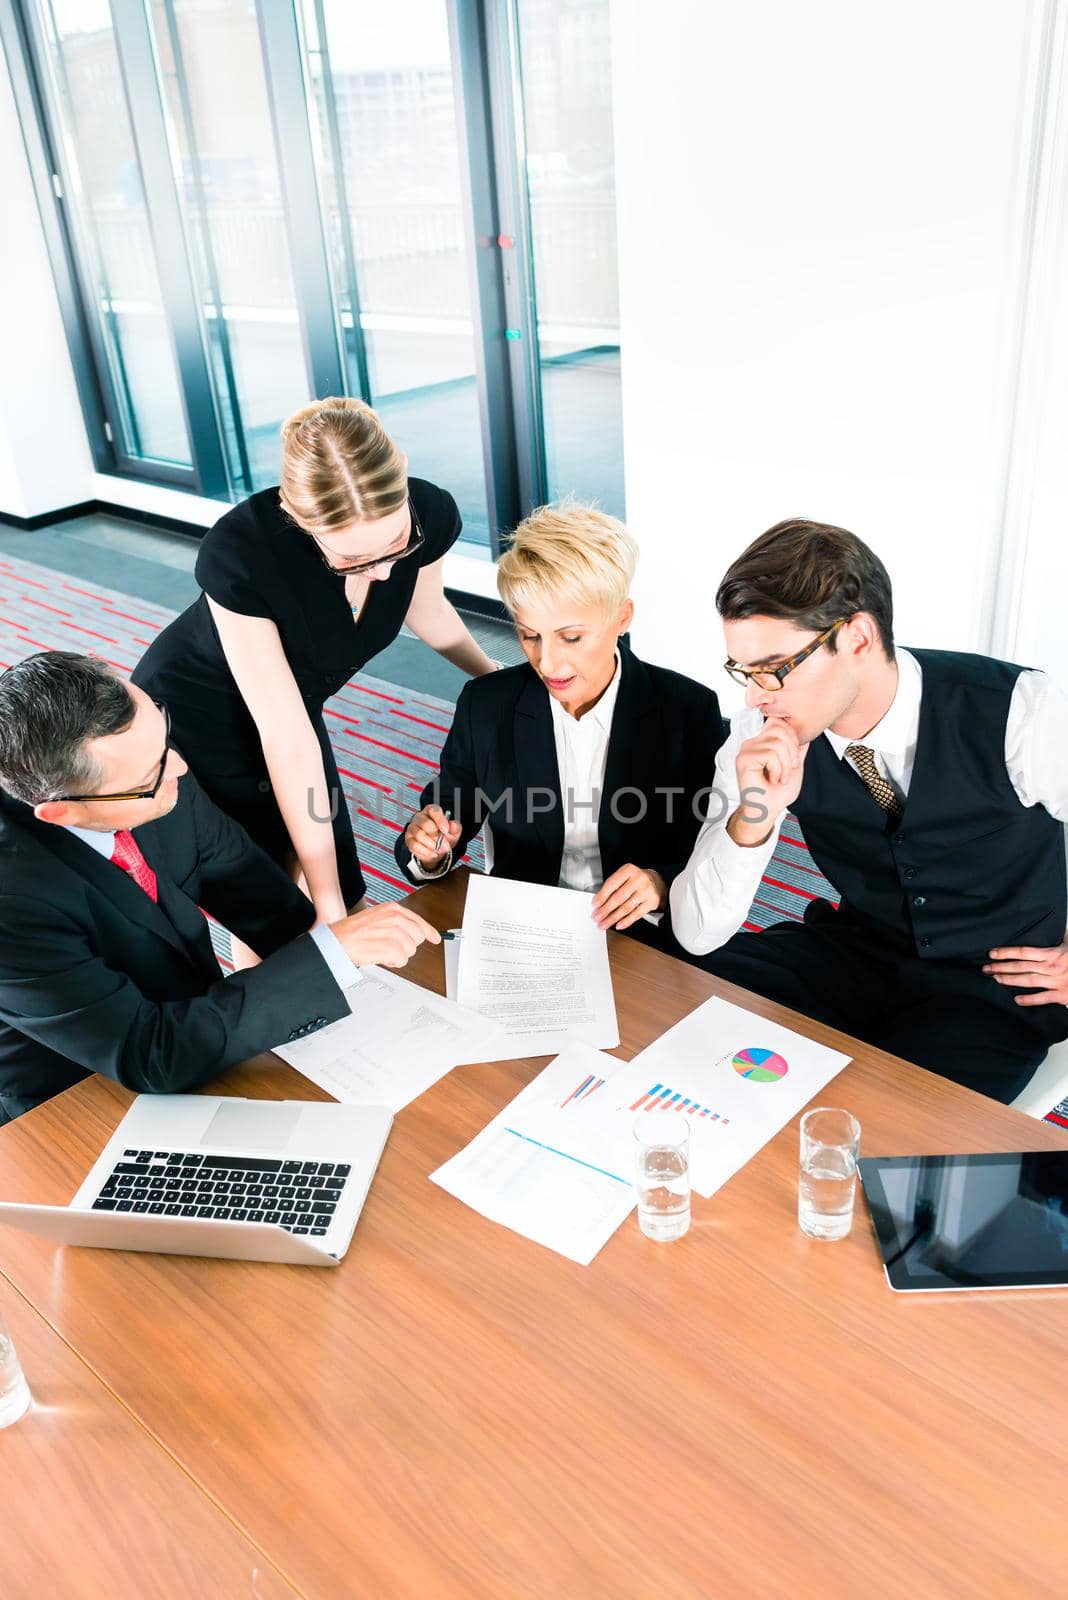 Elevated view of business people studying financial data in meeting